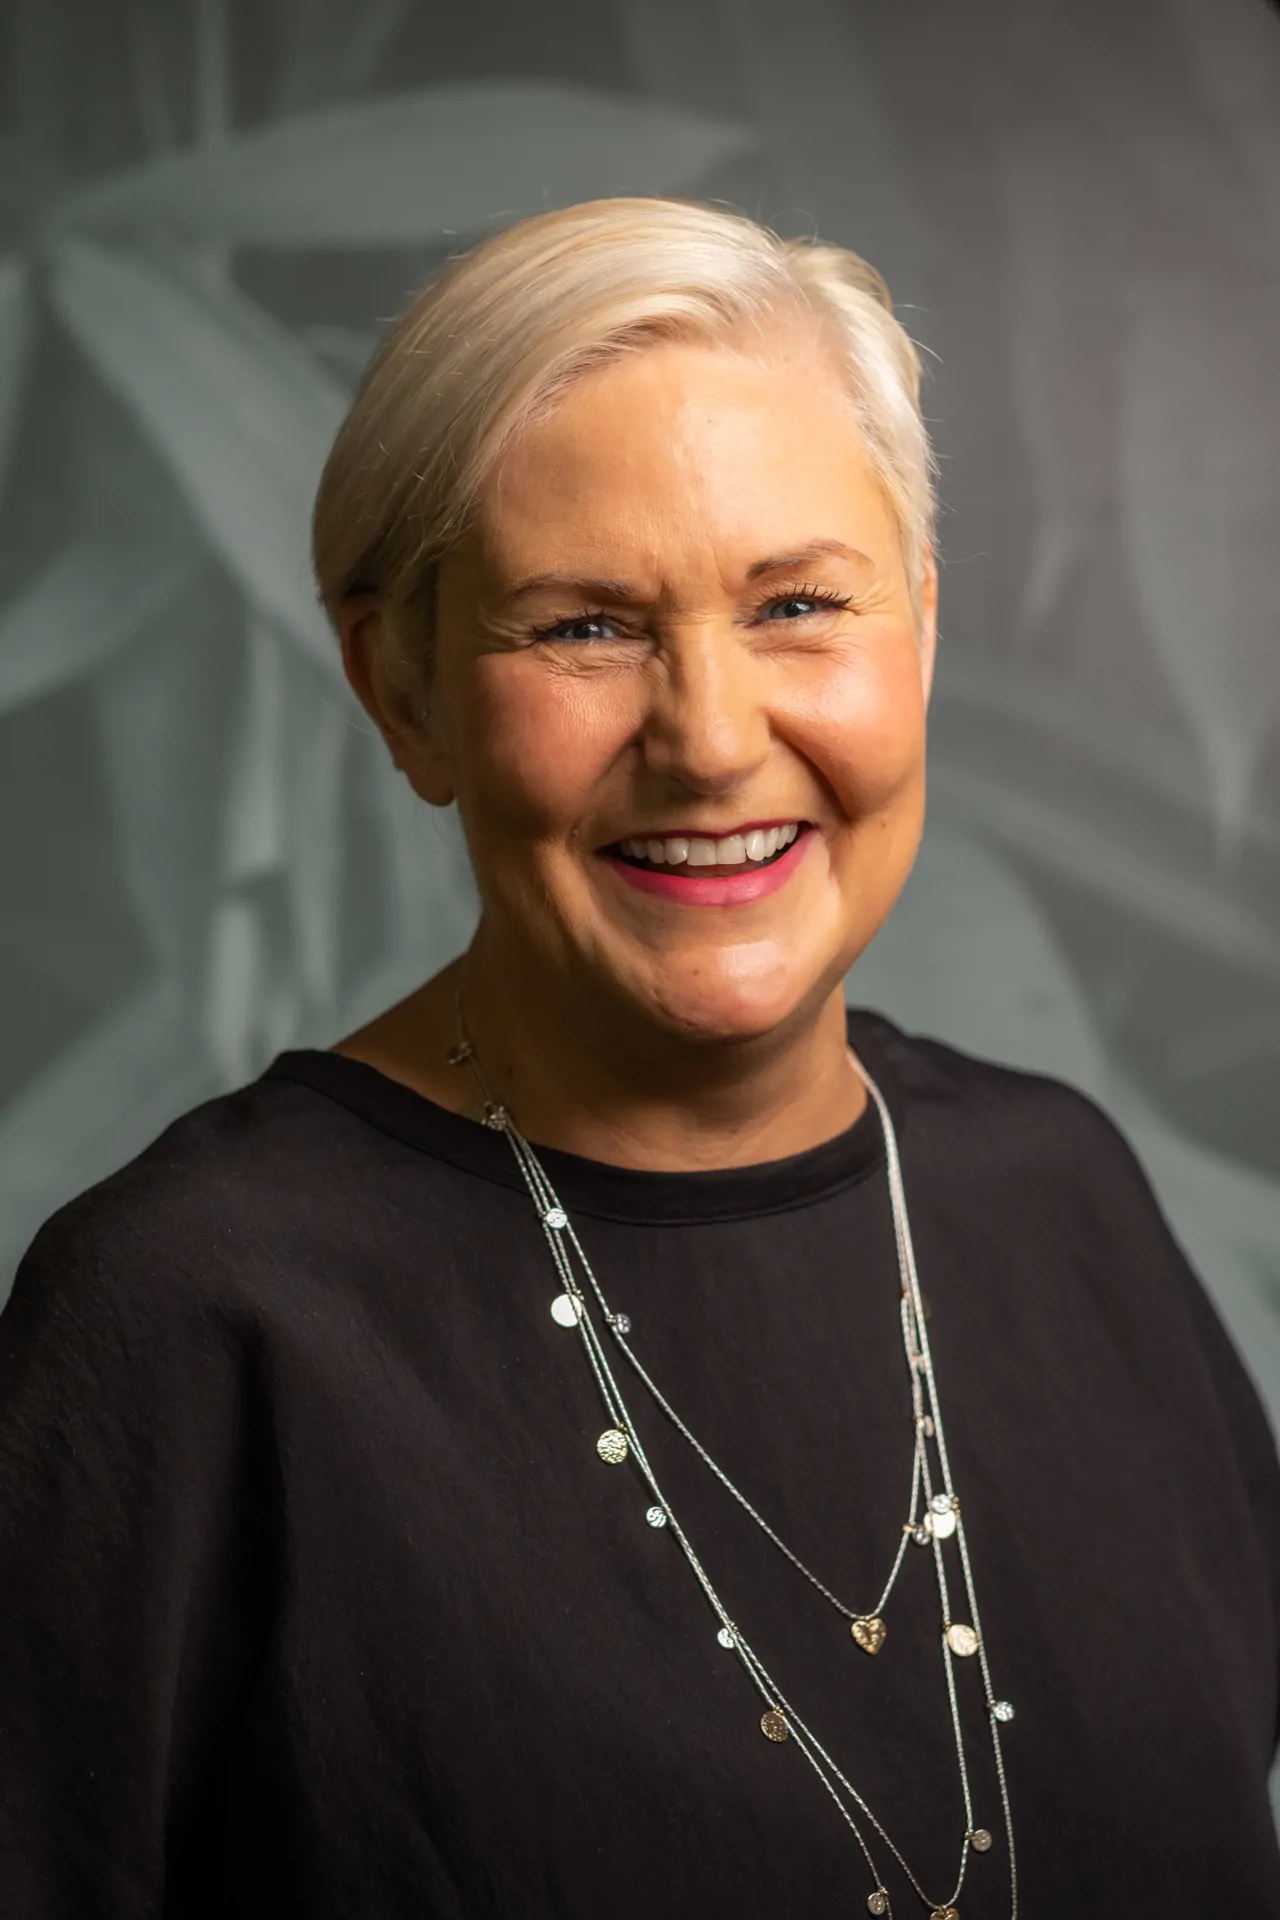 Woman with short platinum hair and wearing a necklace smiling for headshot photo